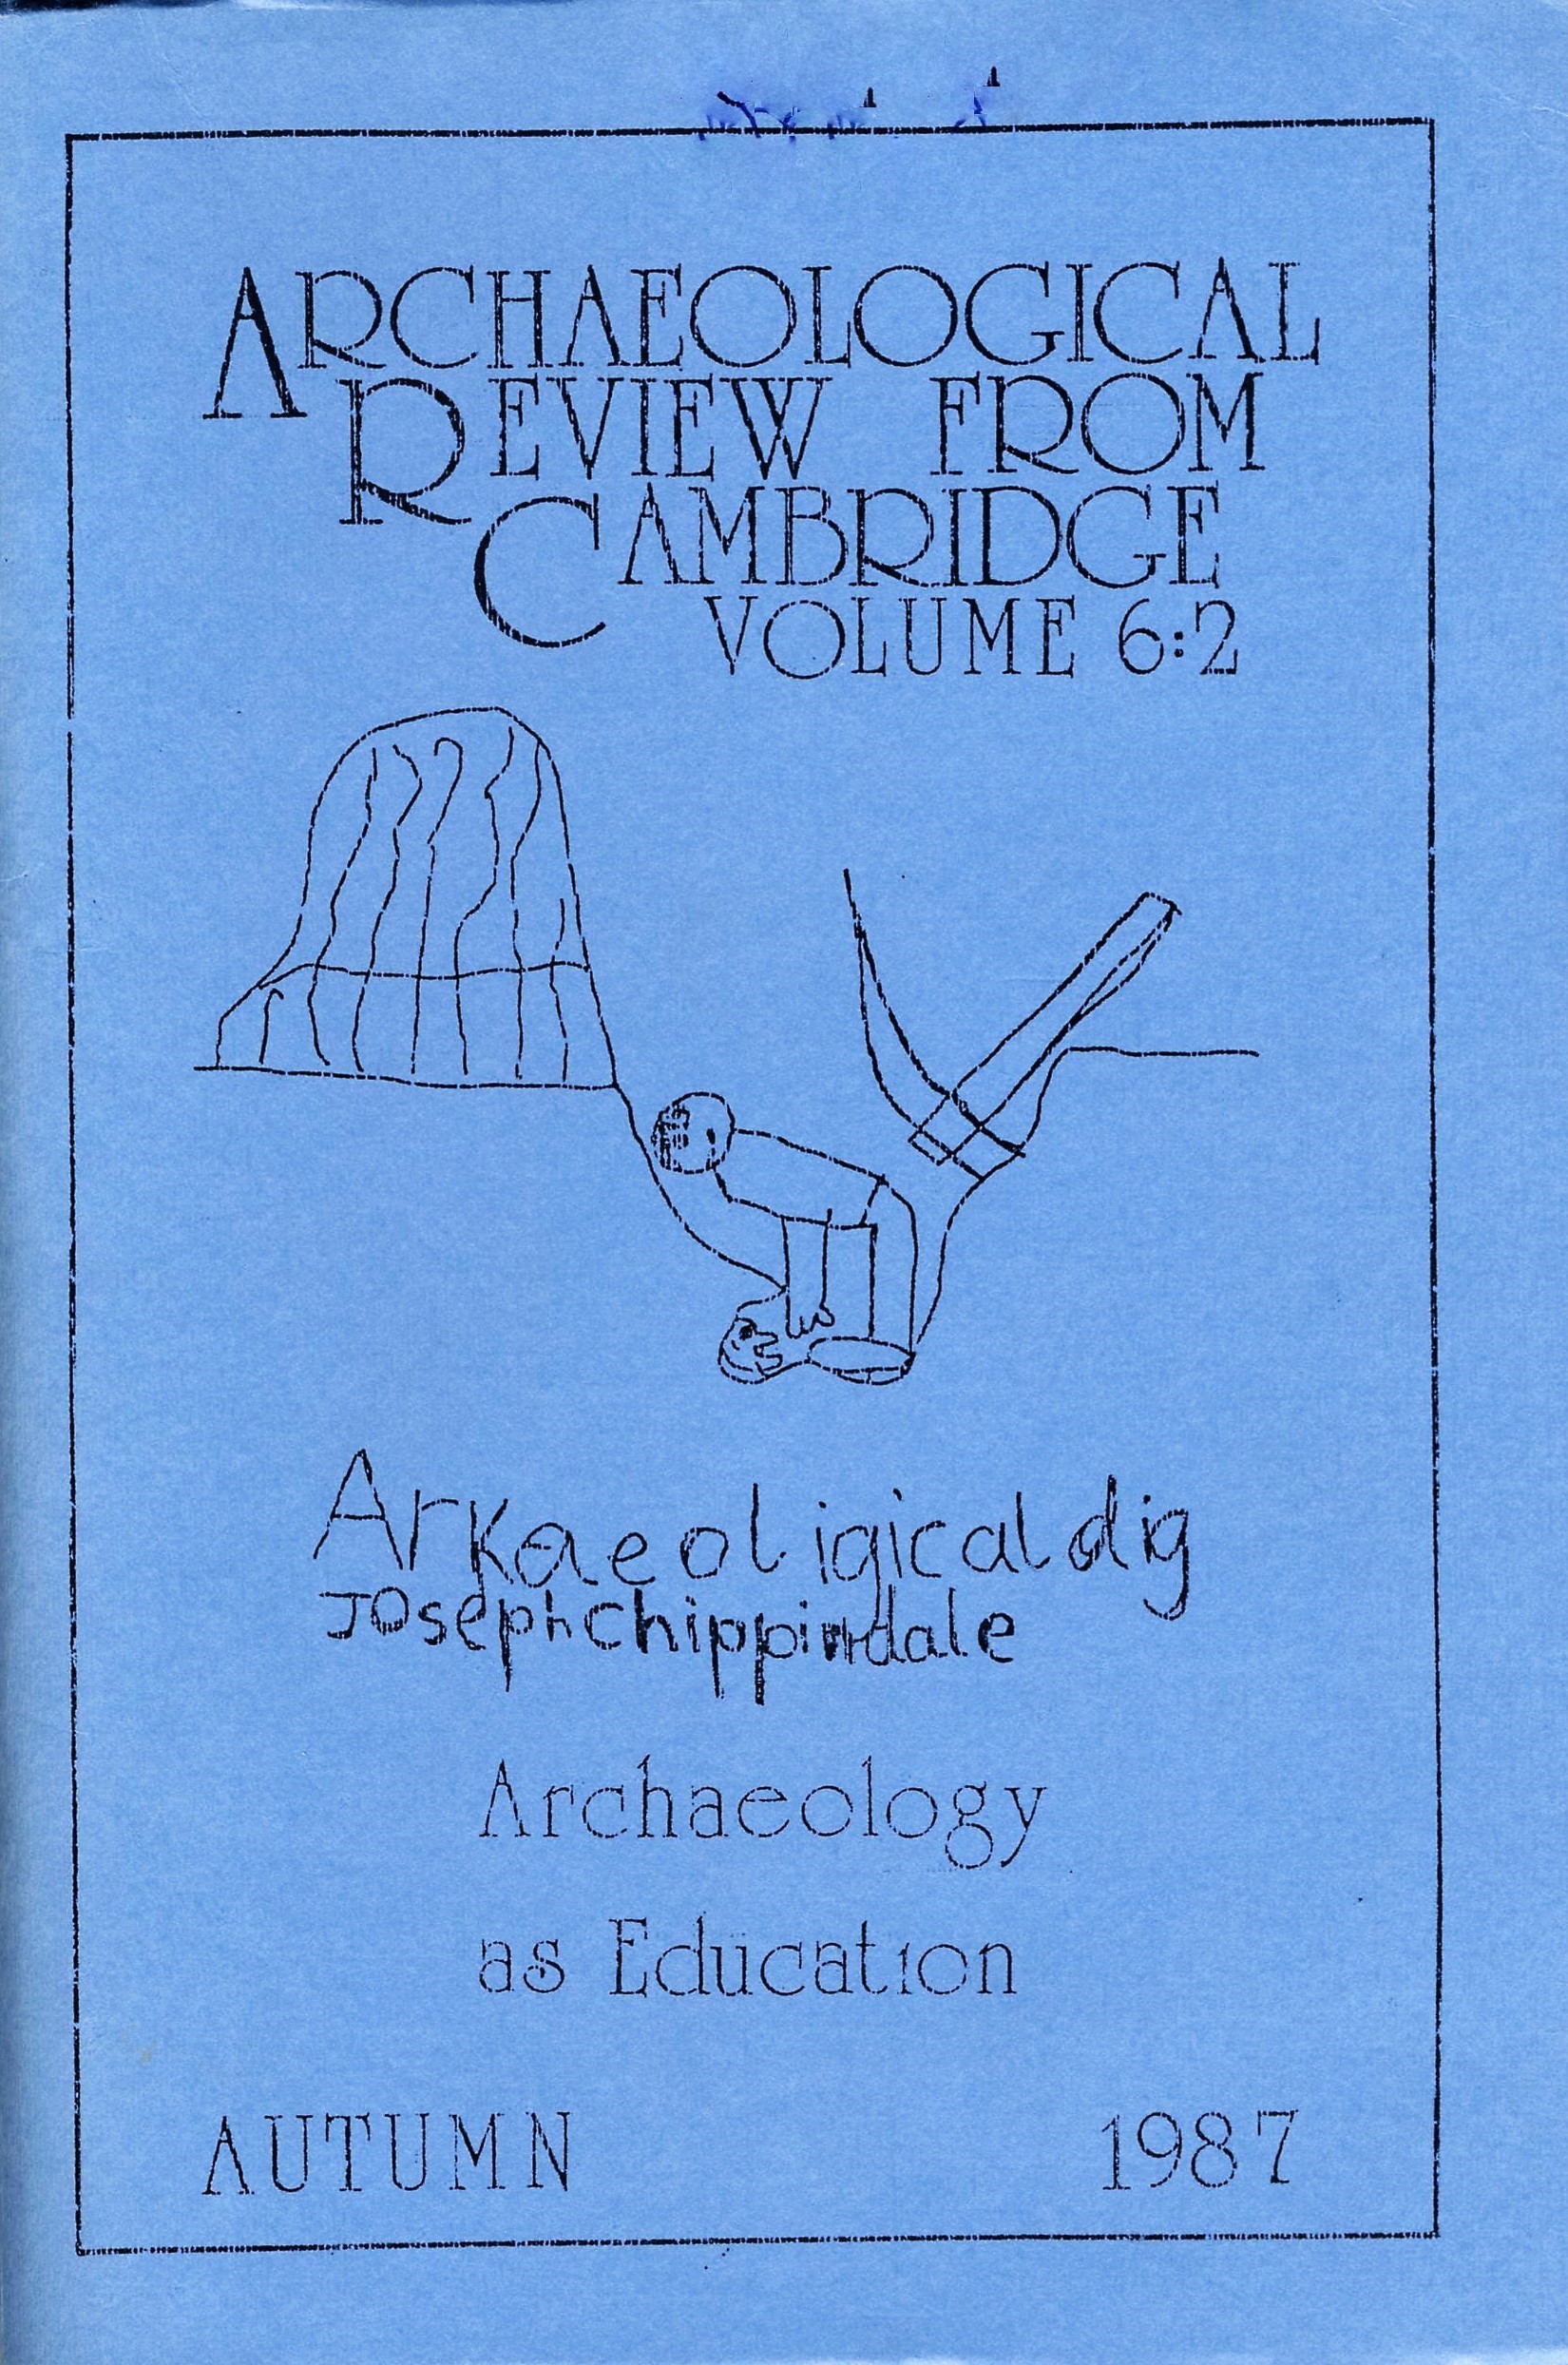 Archaeology as Education